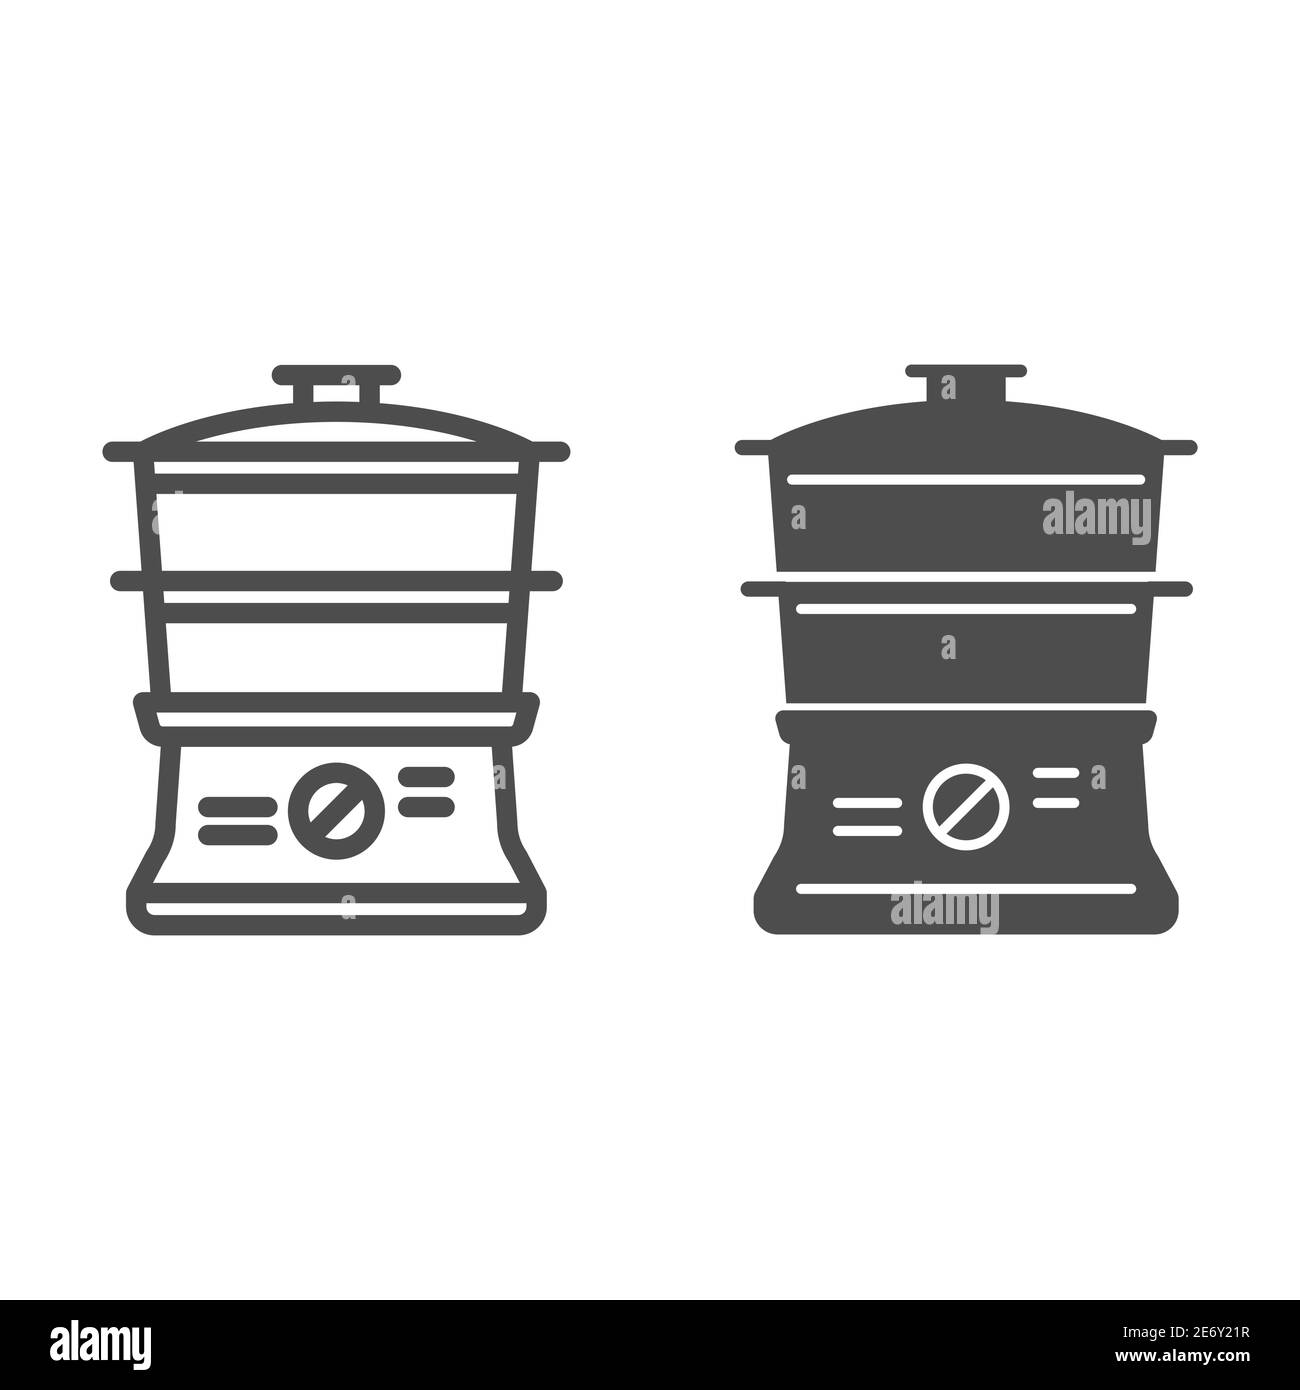 Double Boiler Vector Images (over 970)